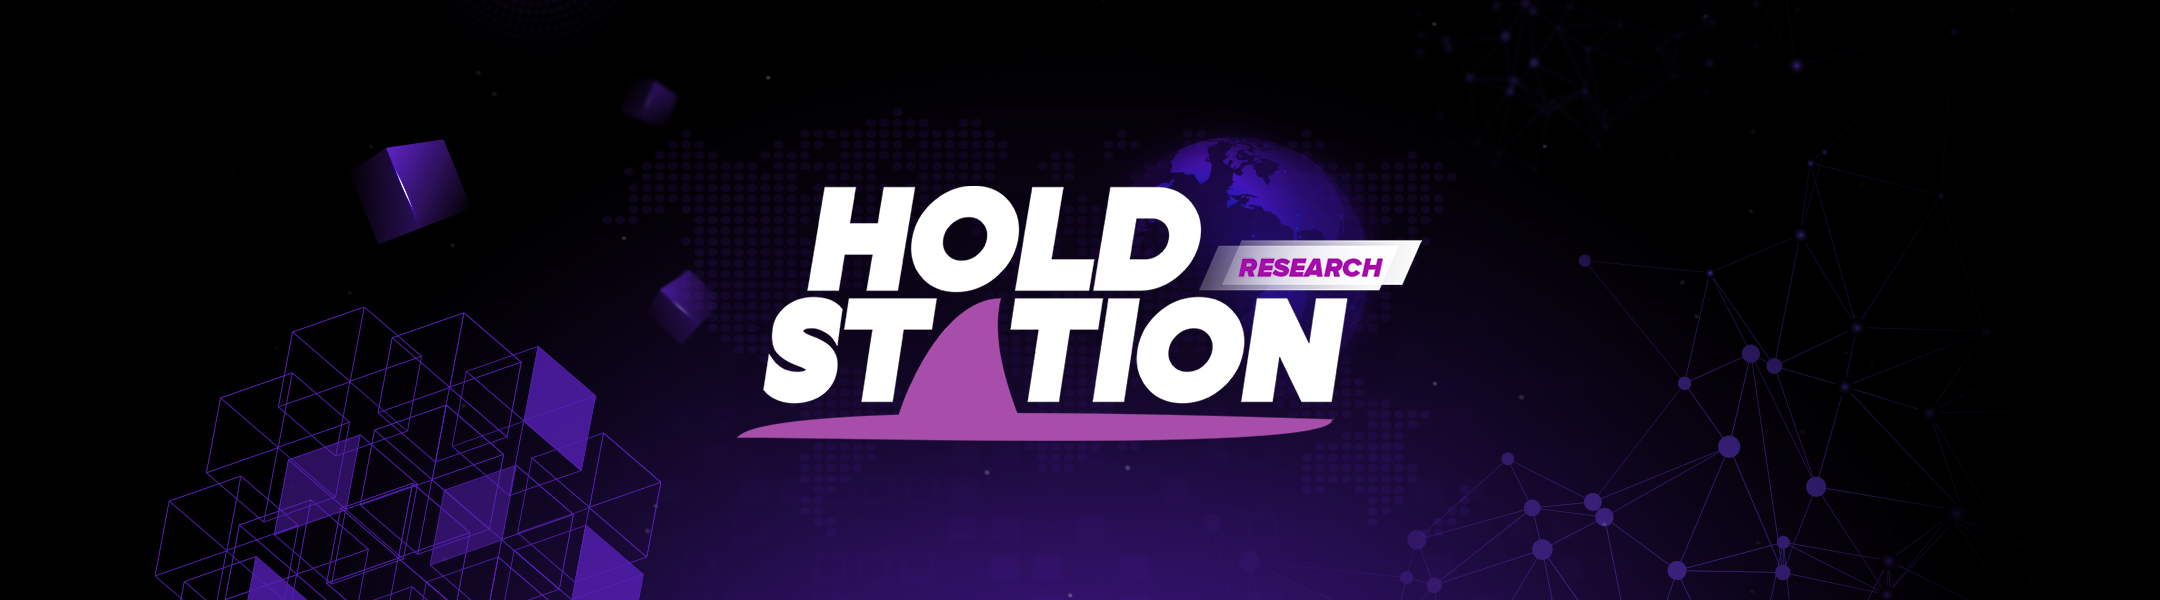 Holdstation Research!